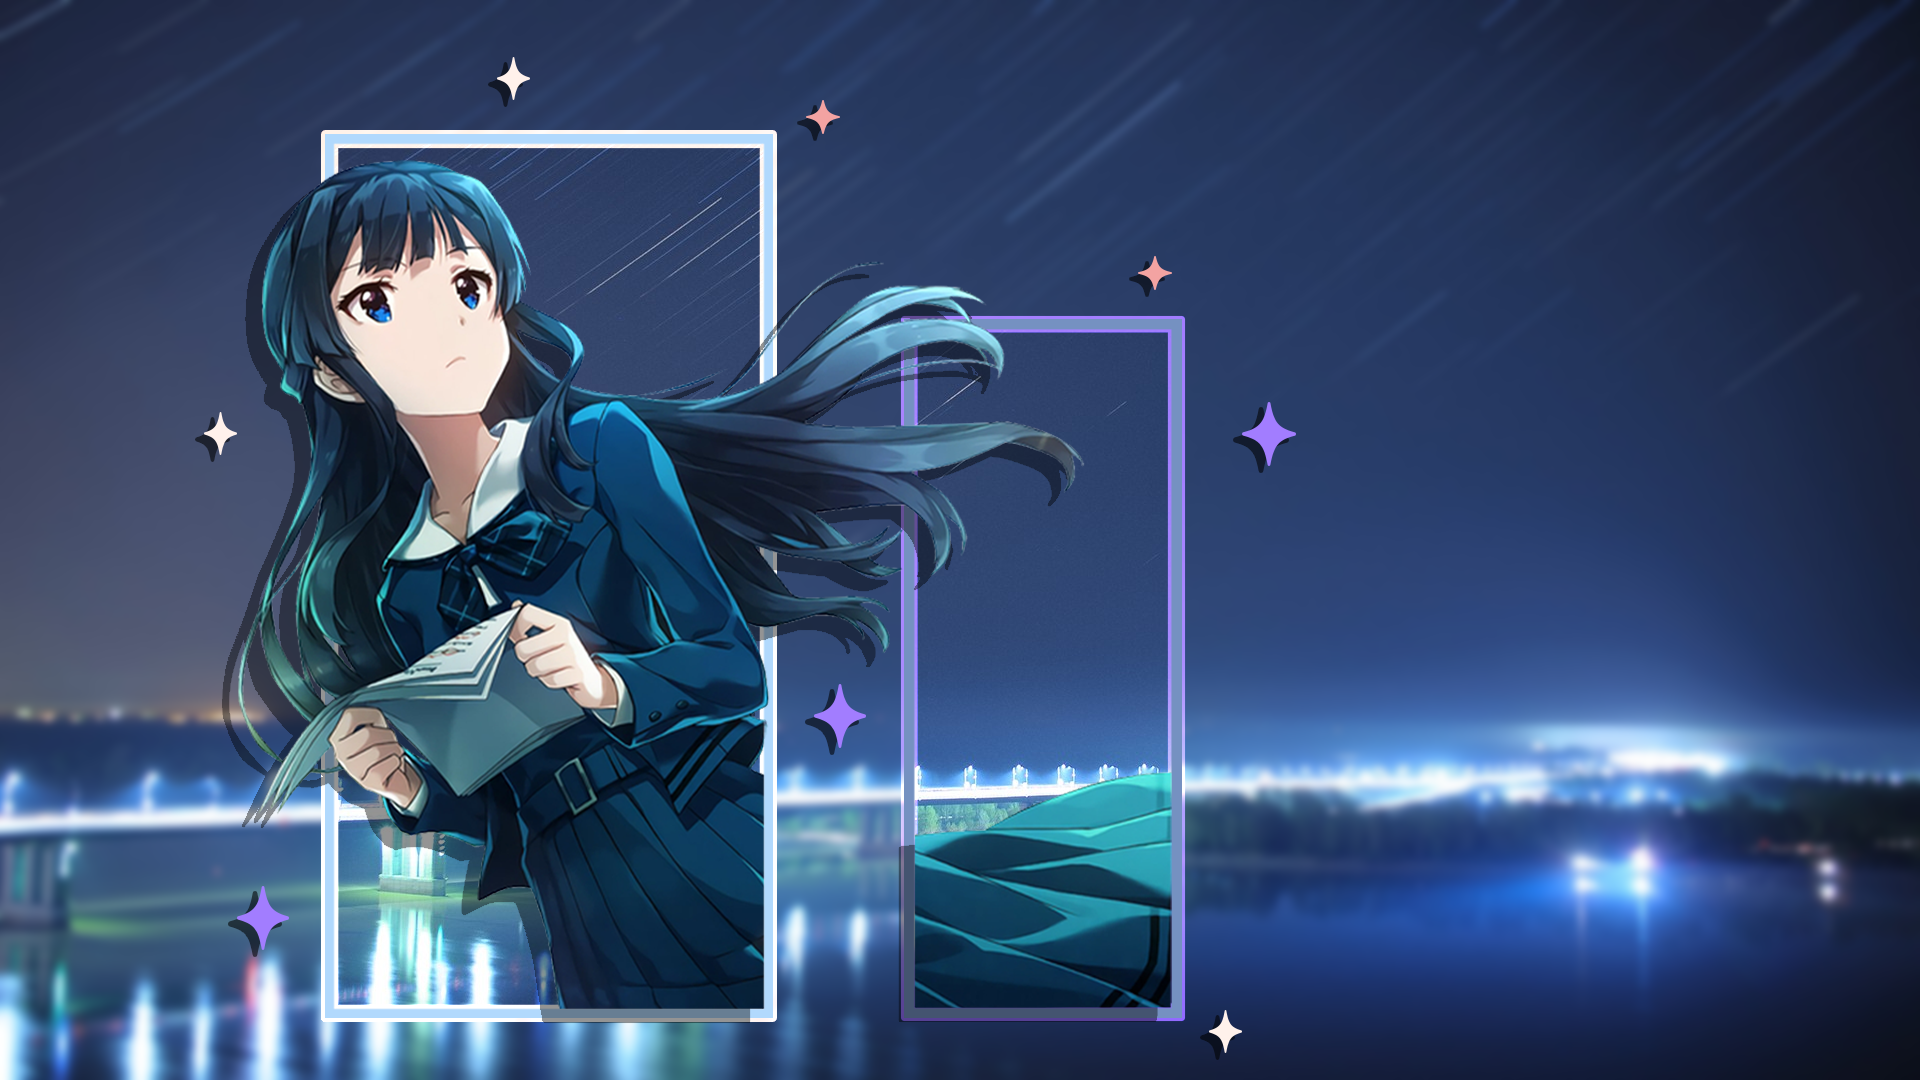 Anime 1920x1080 picture-in-picture anime girls urban night city THE iDOLM@STER stars schoolgirl school uniform looking away bridge water minimalism simple background